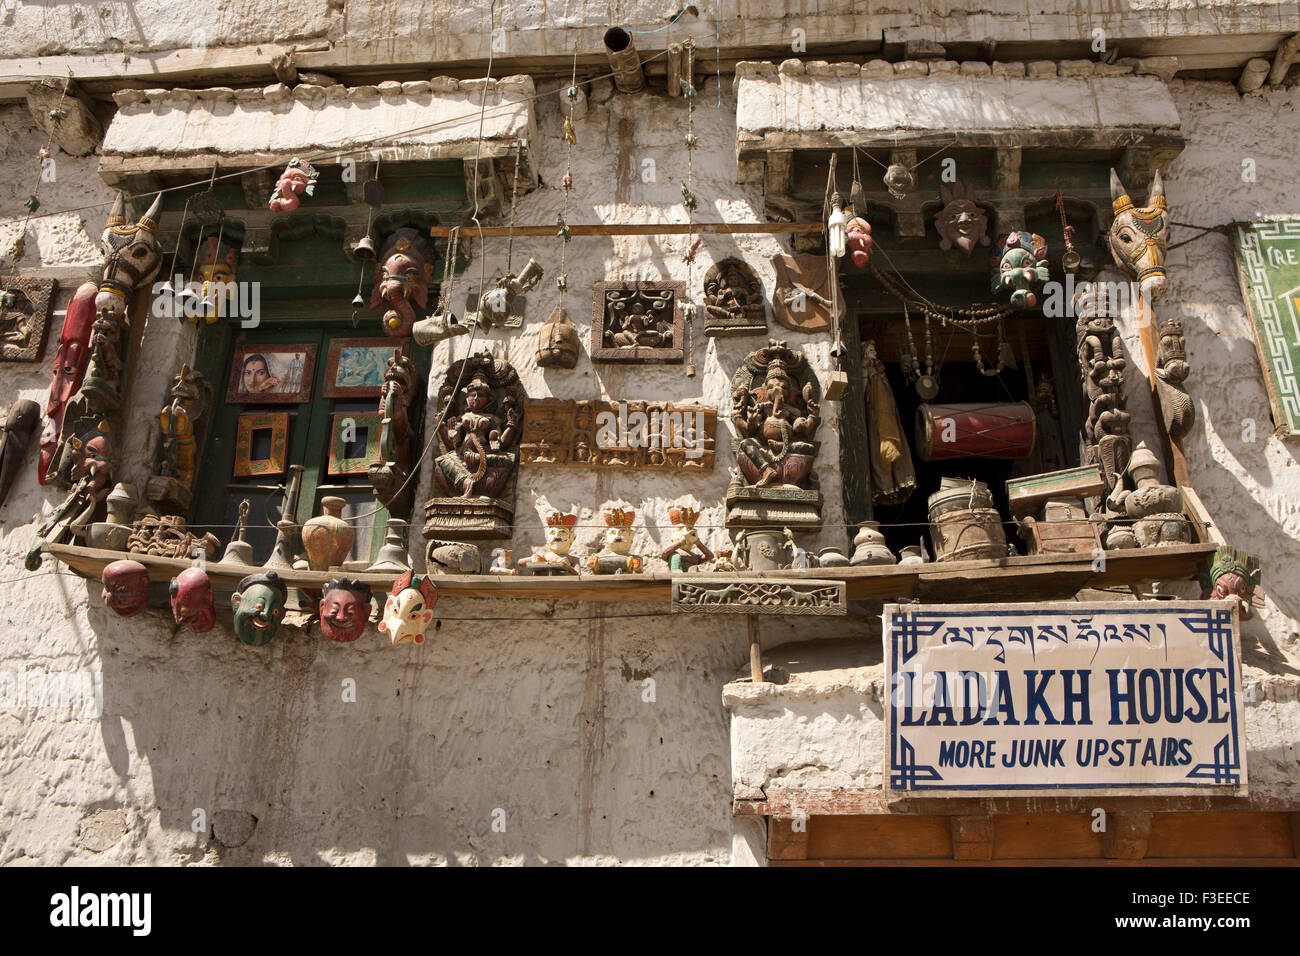 India, Jammu & Kashmir, Ladakh, Leh, Old Town, old crafts on display outside Ladakh House, antiques and junk shop Stock Photo